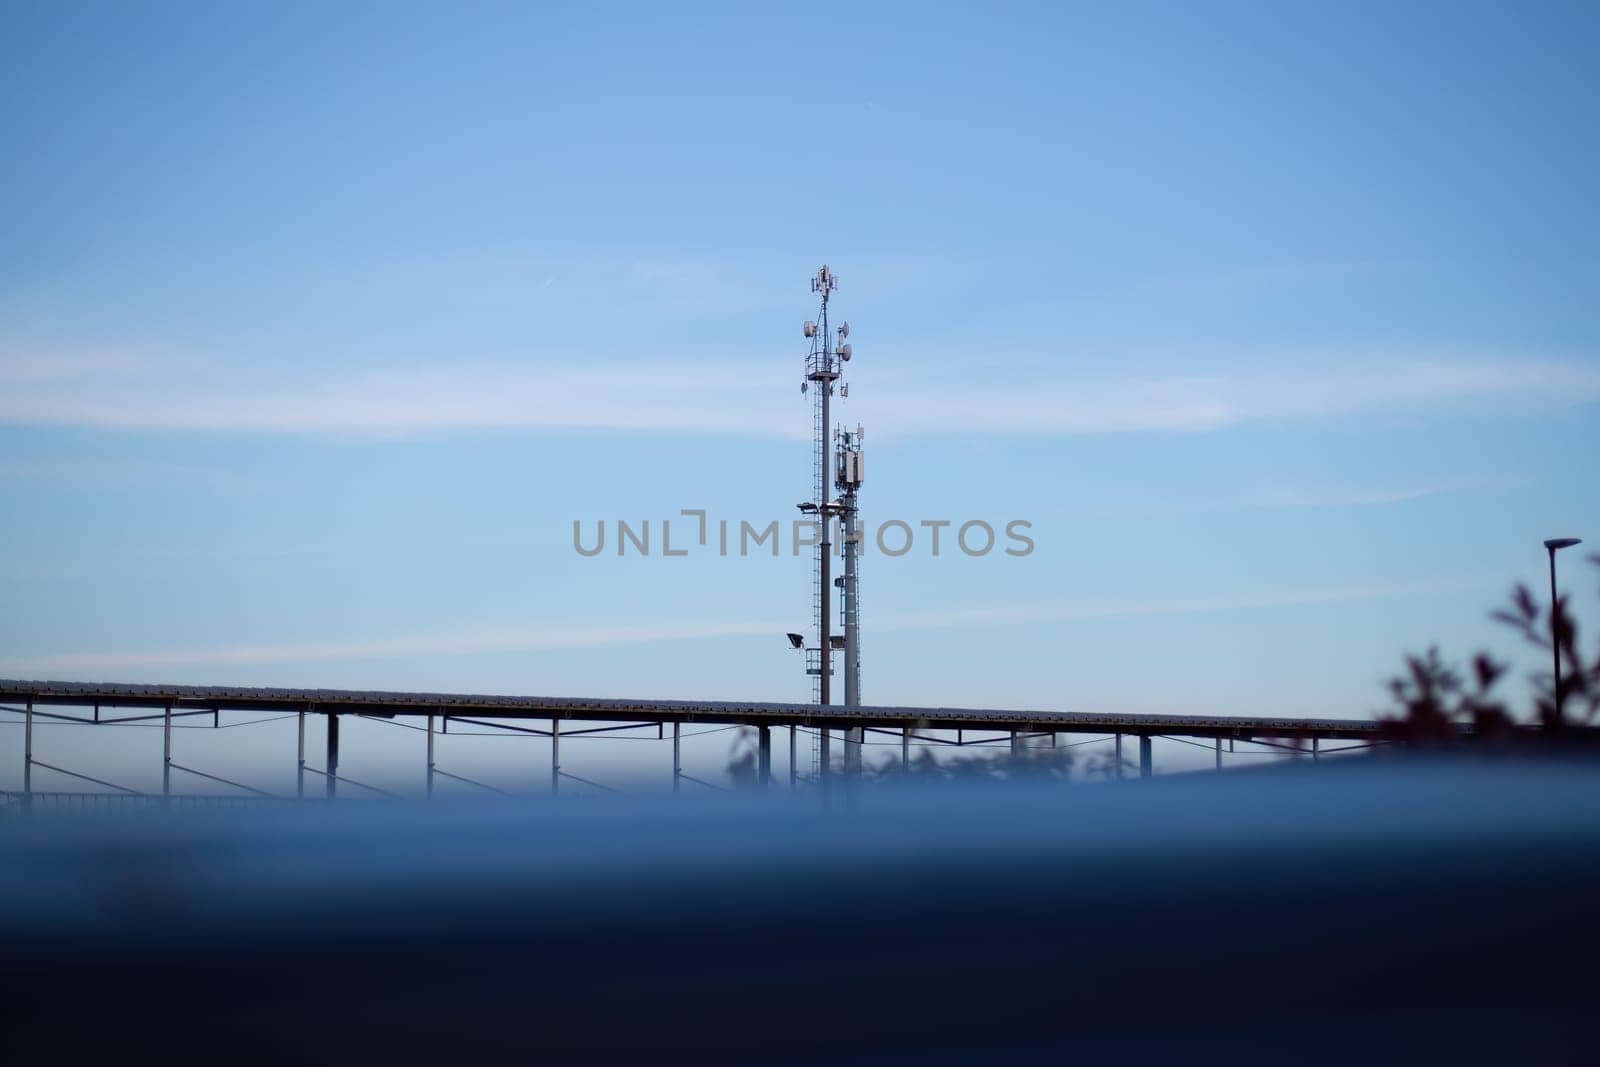 A futuristic cell phone tower rises from the water, its metallic structure gleaming in the sunlight as it provides connectivity to nearby areas.